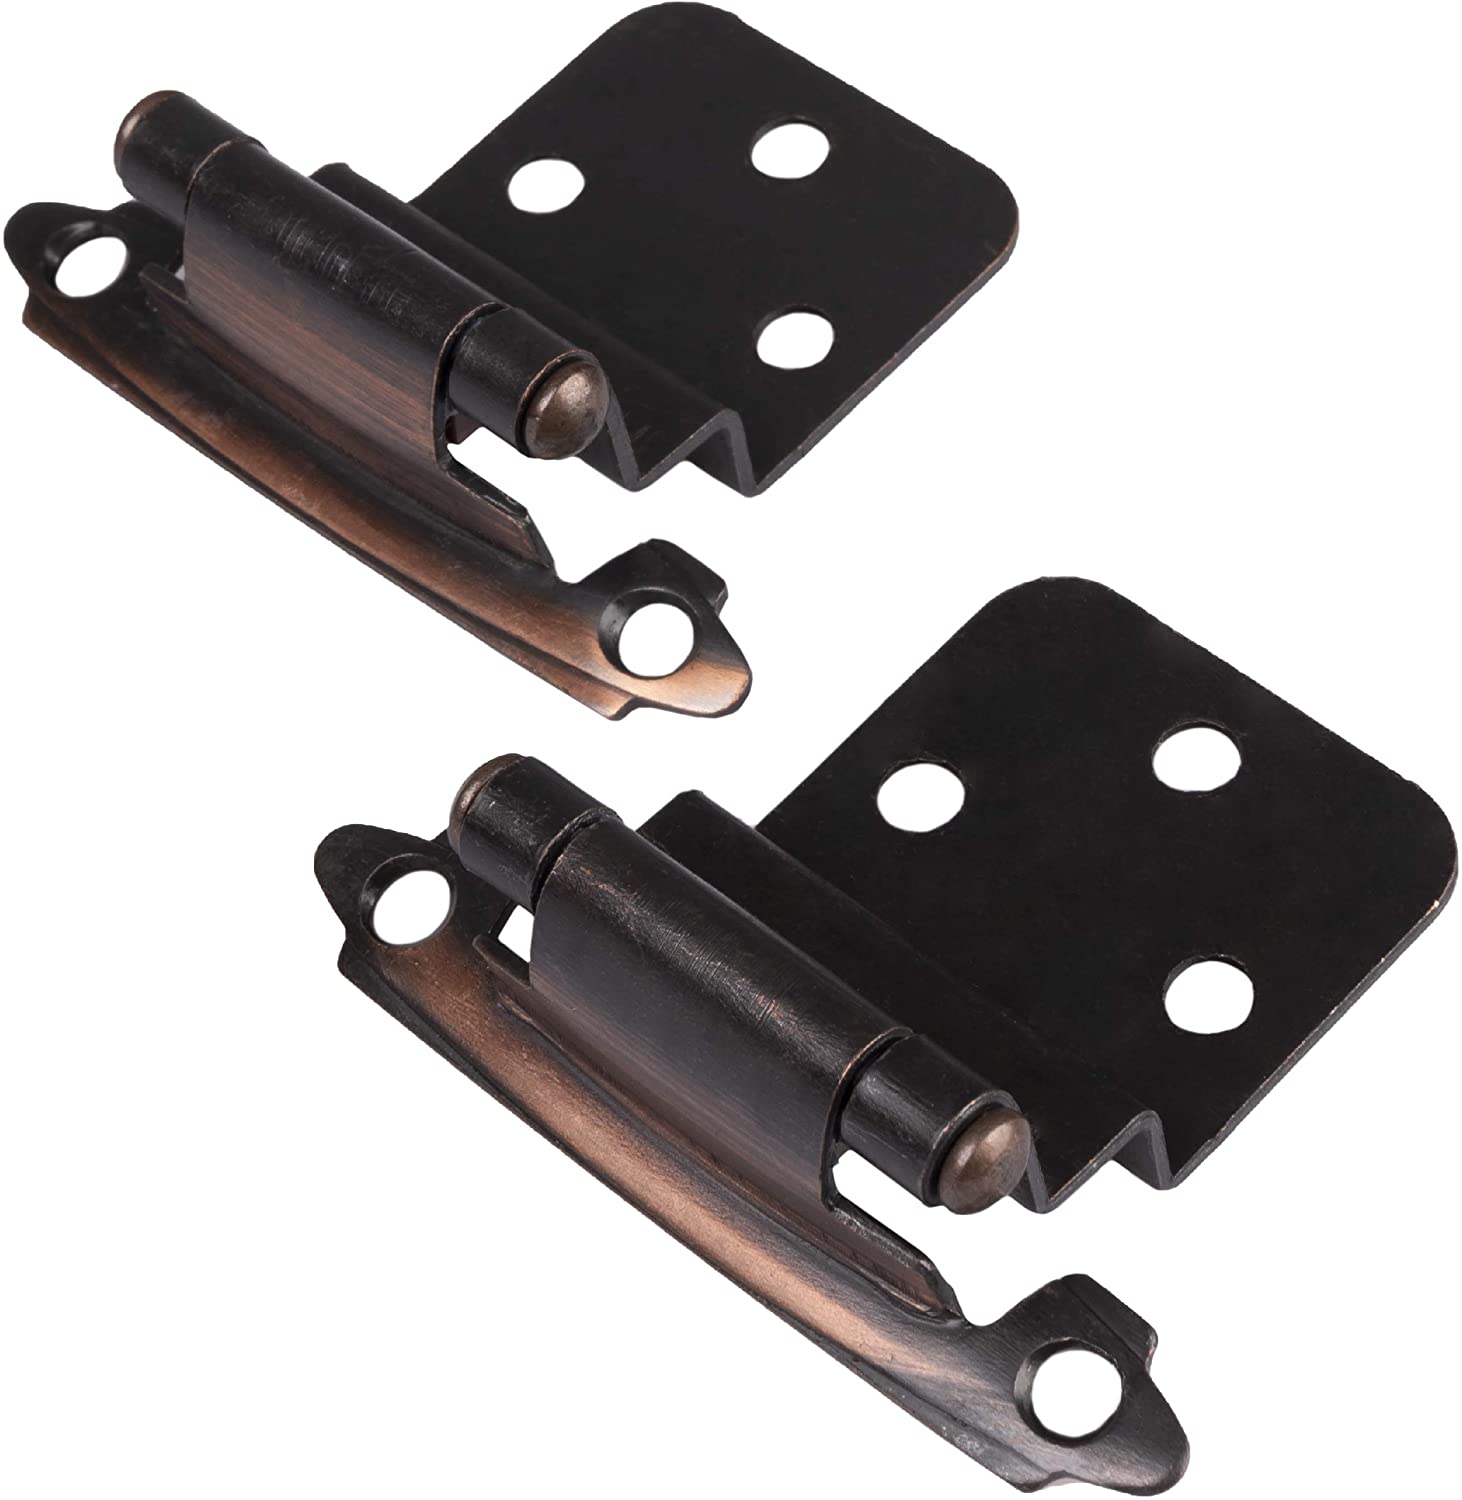 Self Closing Cabinet Hinges Oil Rubbed Bronze, 50 Pack - 3/8 Inch Inset Variable Overlay Kitchen Cabinet Door Hinge Hardware